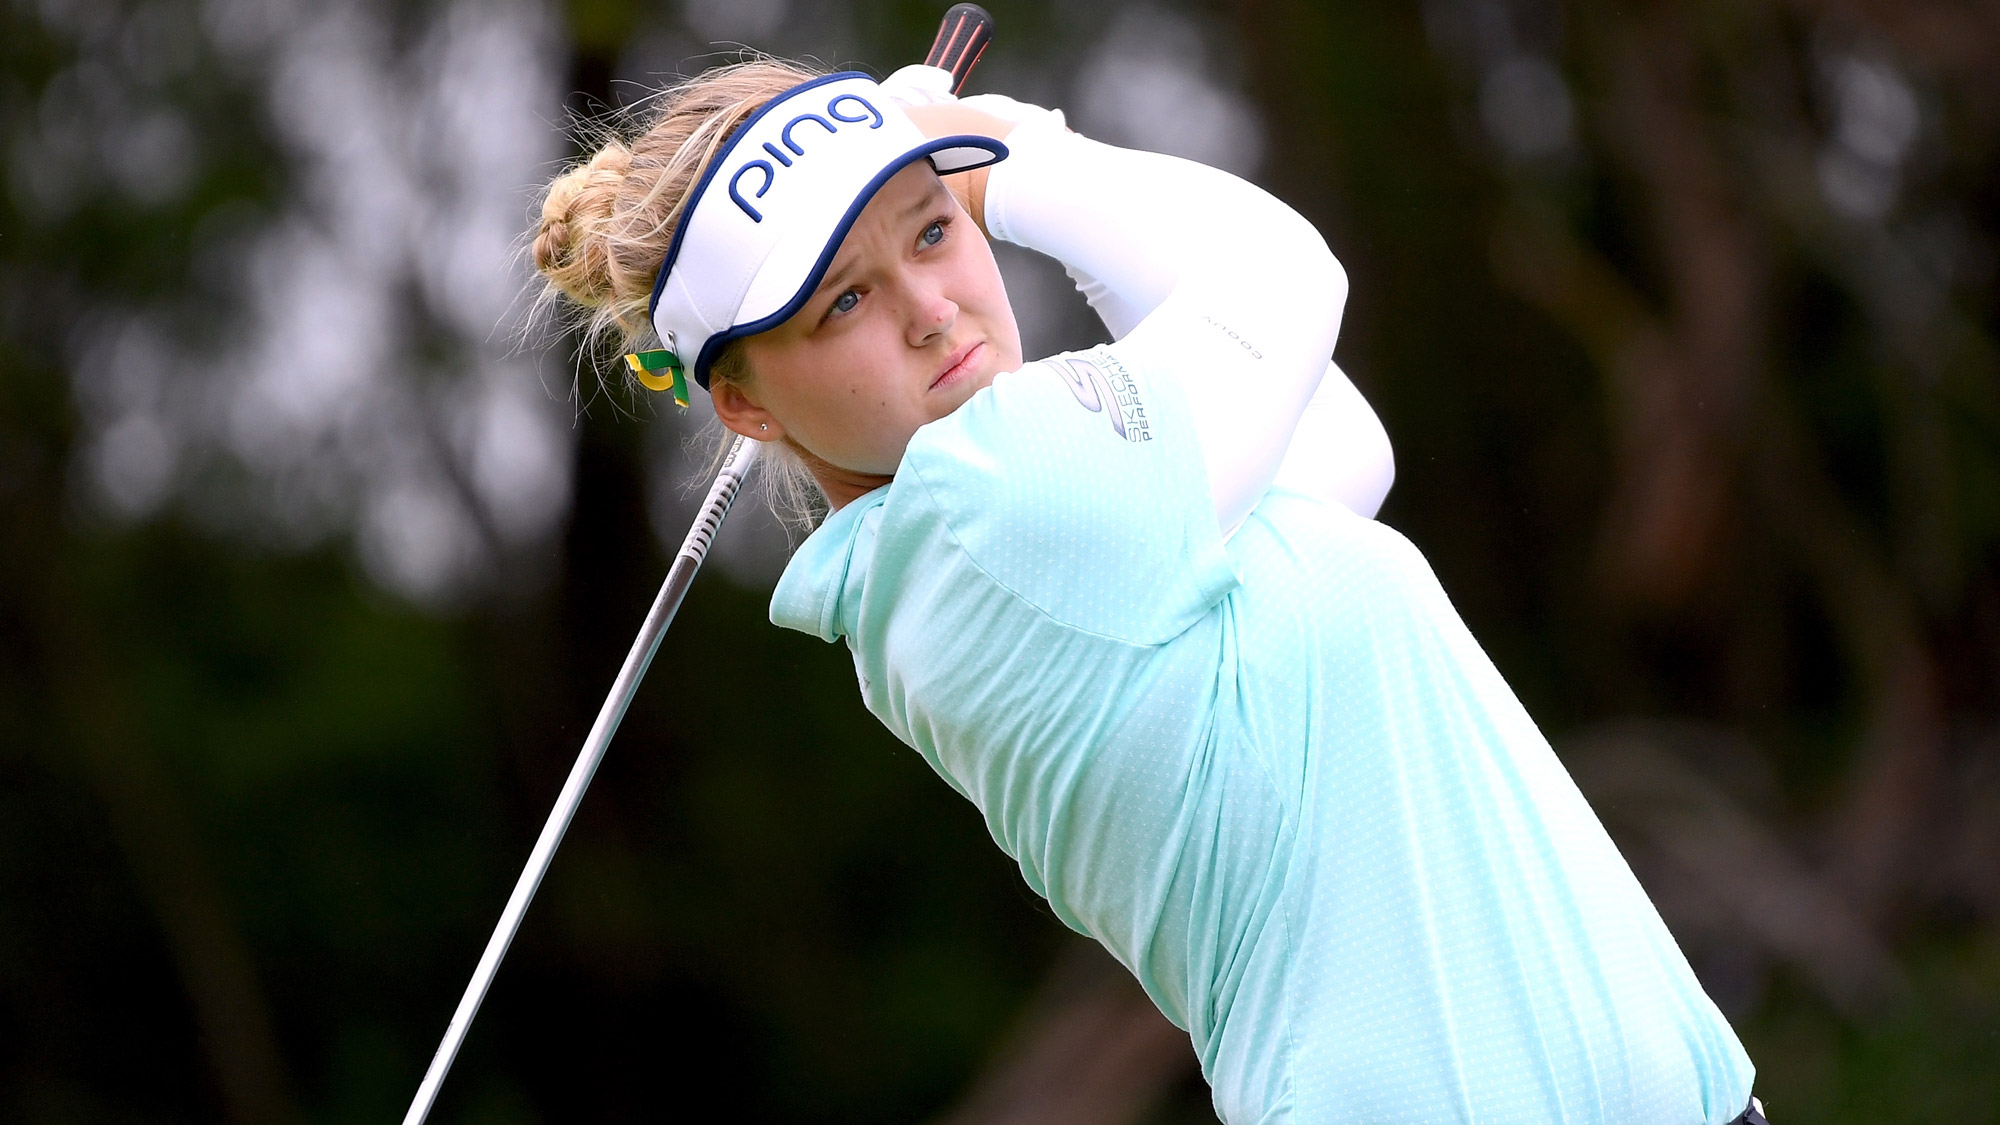 Brooke Henderson Rips Driver at LOTTE Championship